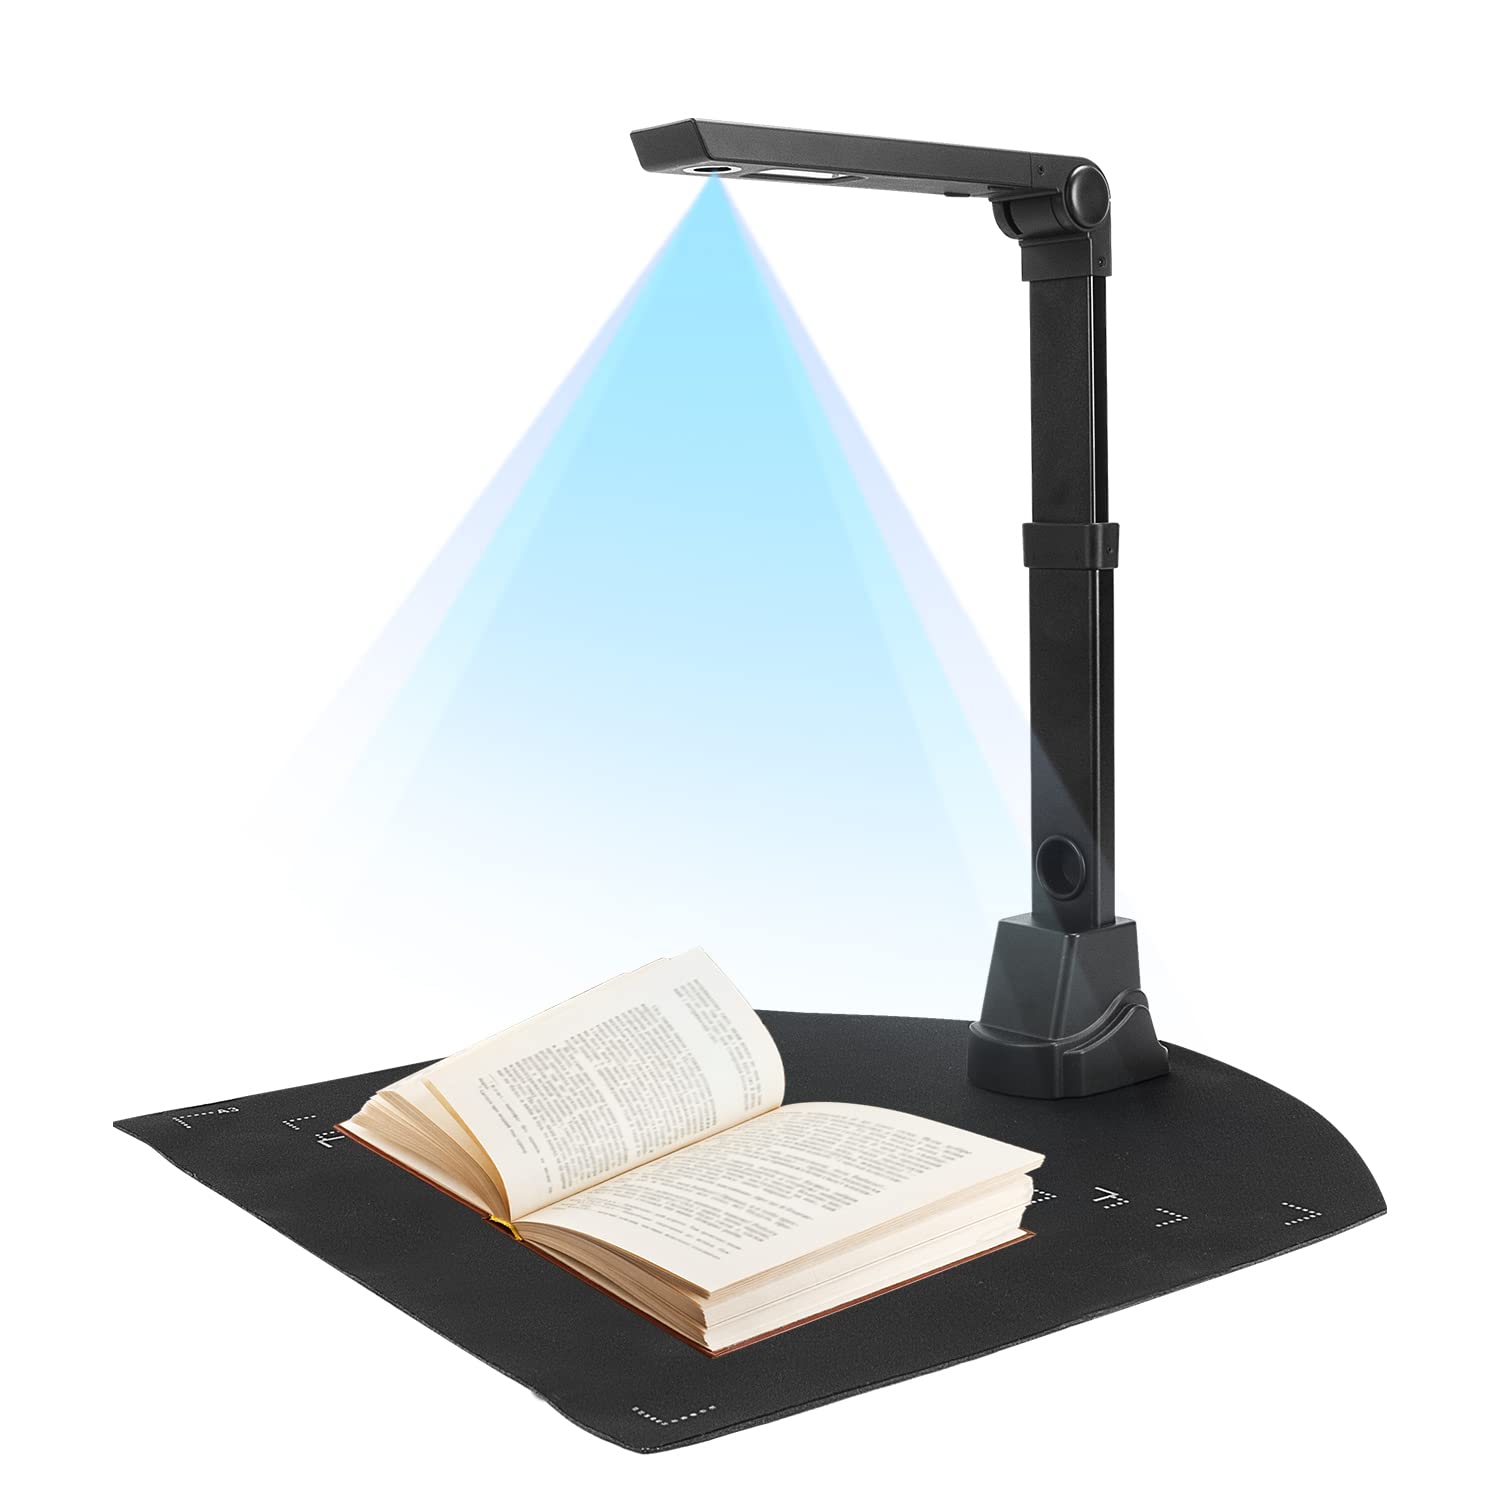 NetumScan 13MP Book Document Camera for Teachers, Multi-Language OCR Recognition by AI Technology, Foldable & Portable, Real-time Projection, Video Recording, Capture Size A3/A4, Only Windows